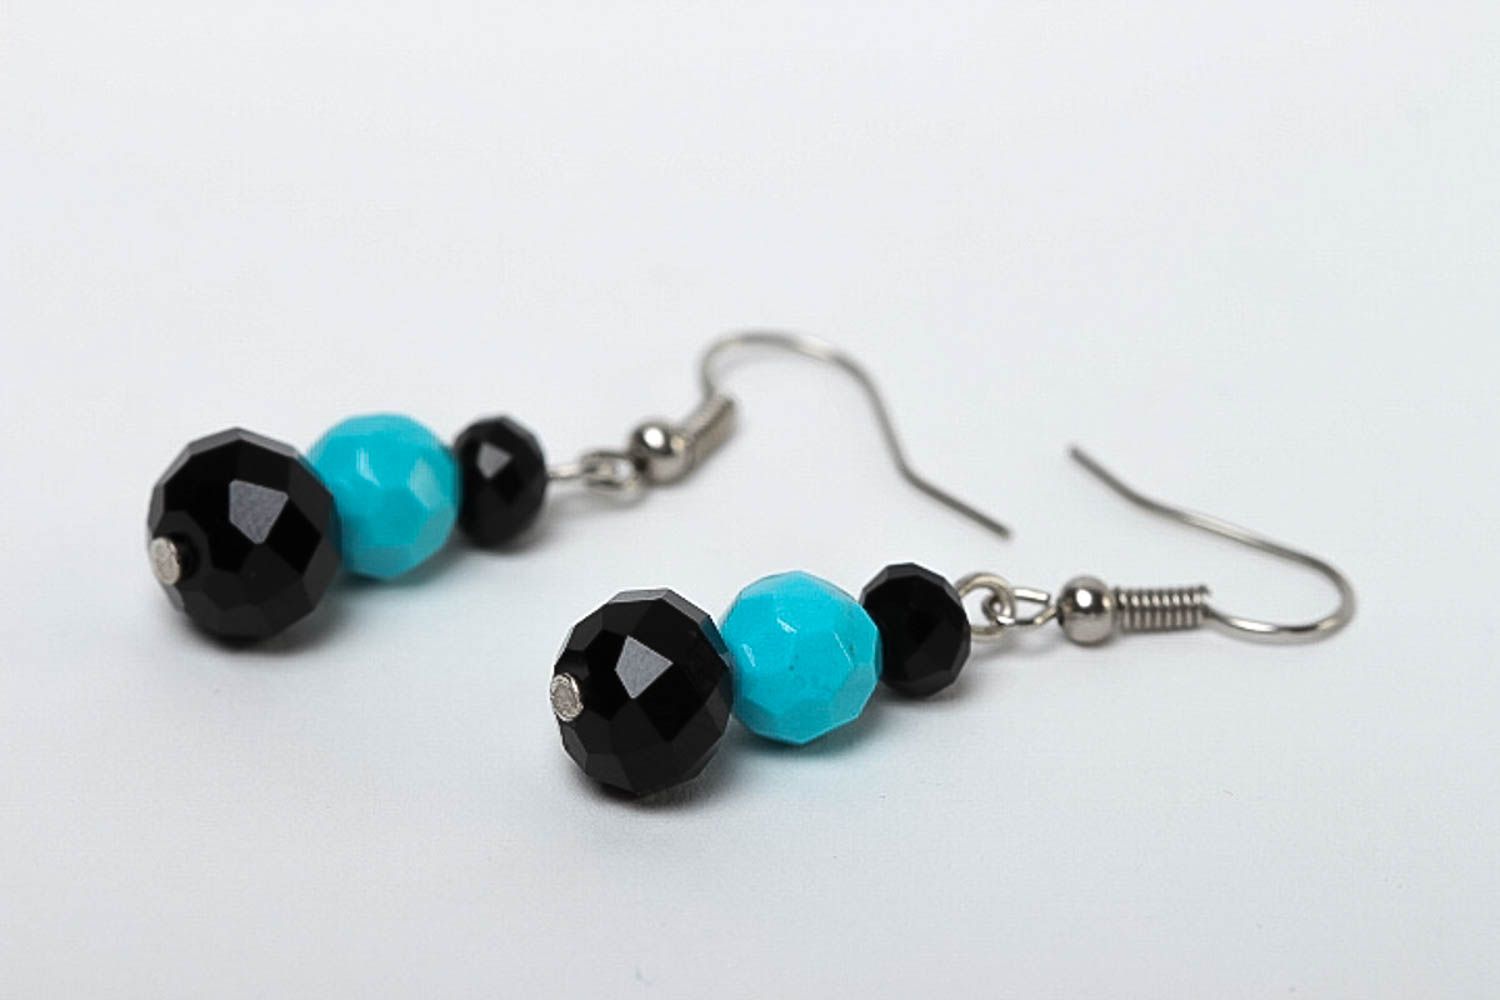 Handmade earrings with turquoise beads earrings with charms designer jewelry photo 3